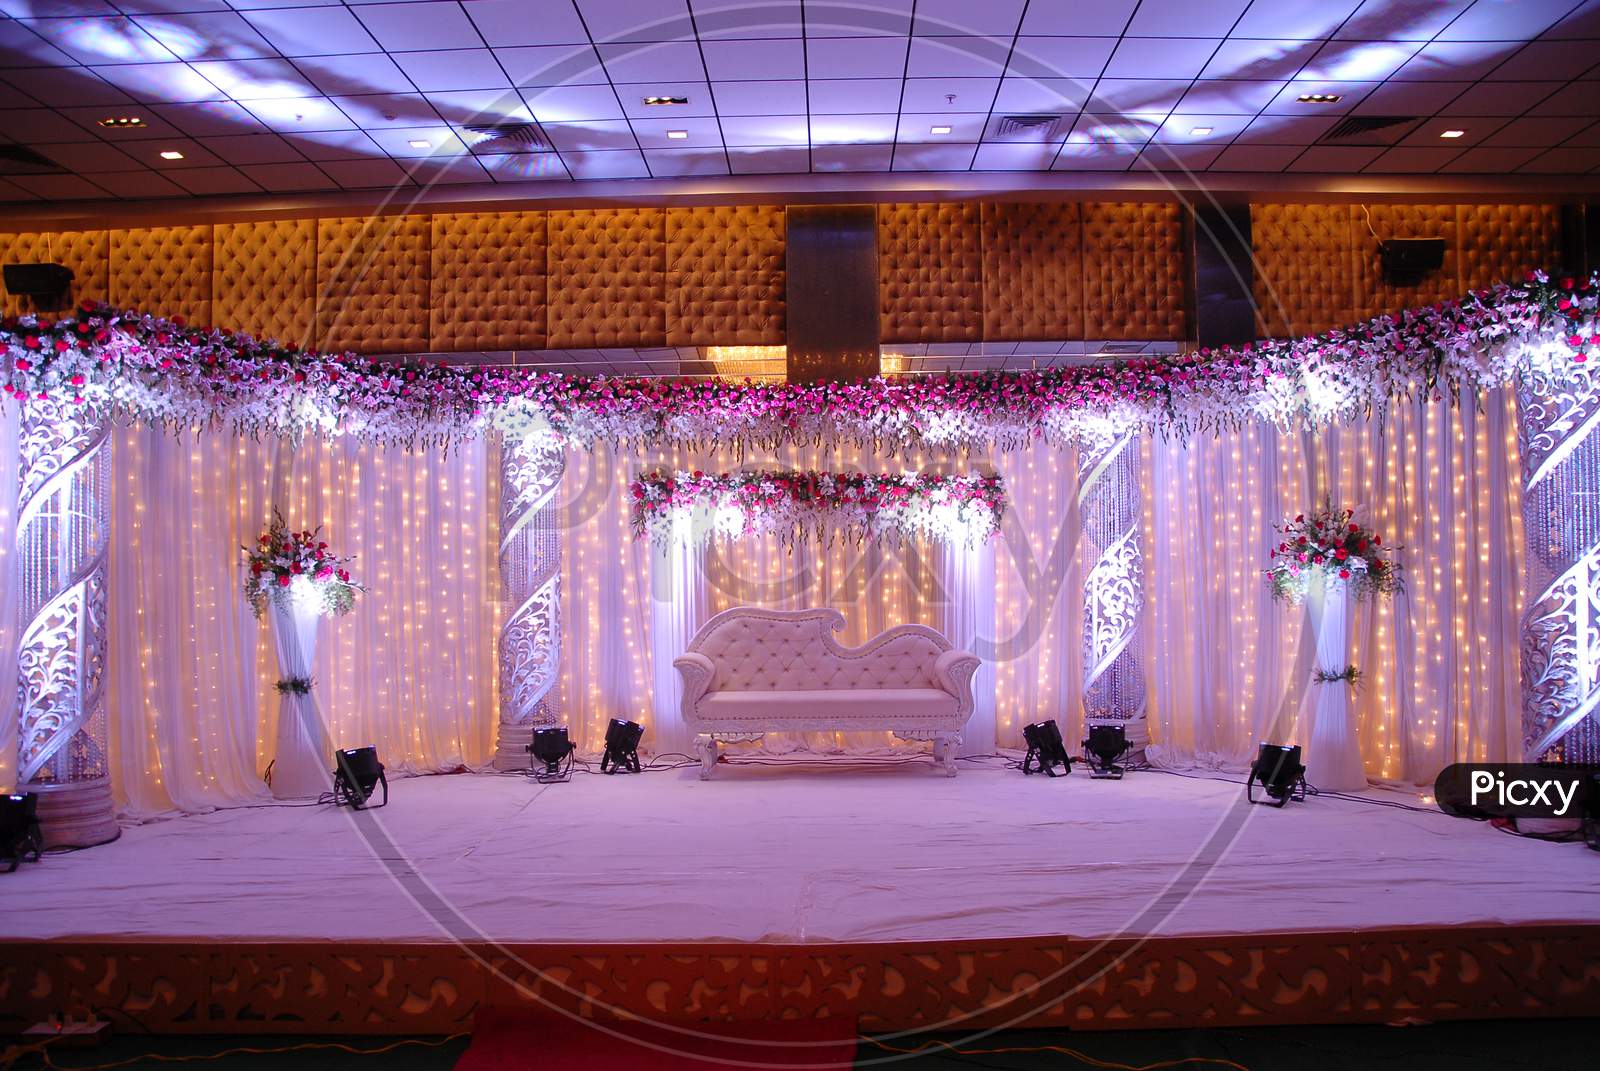 A Decorated stage with setup with lights